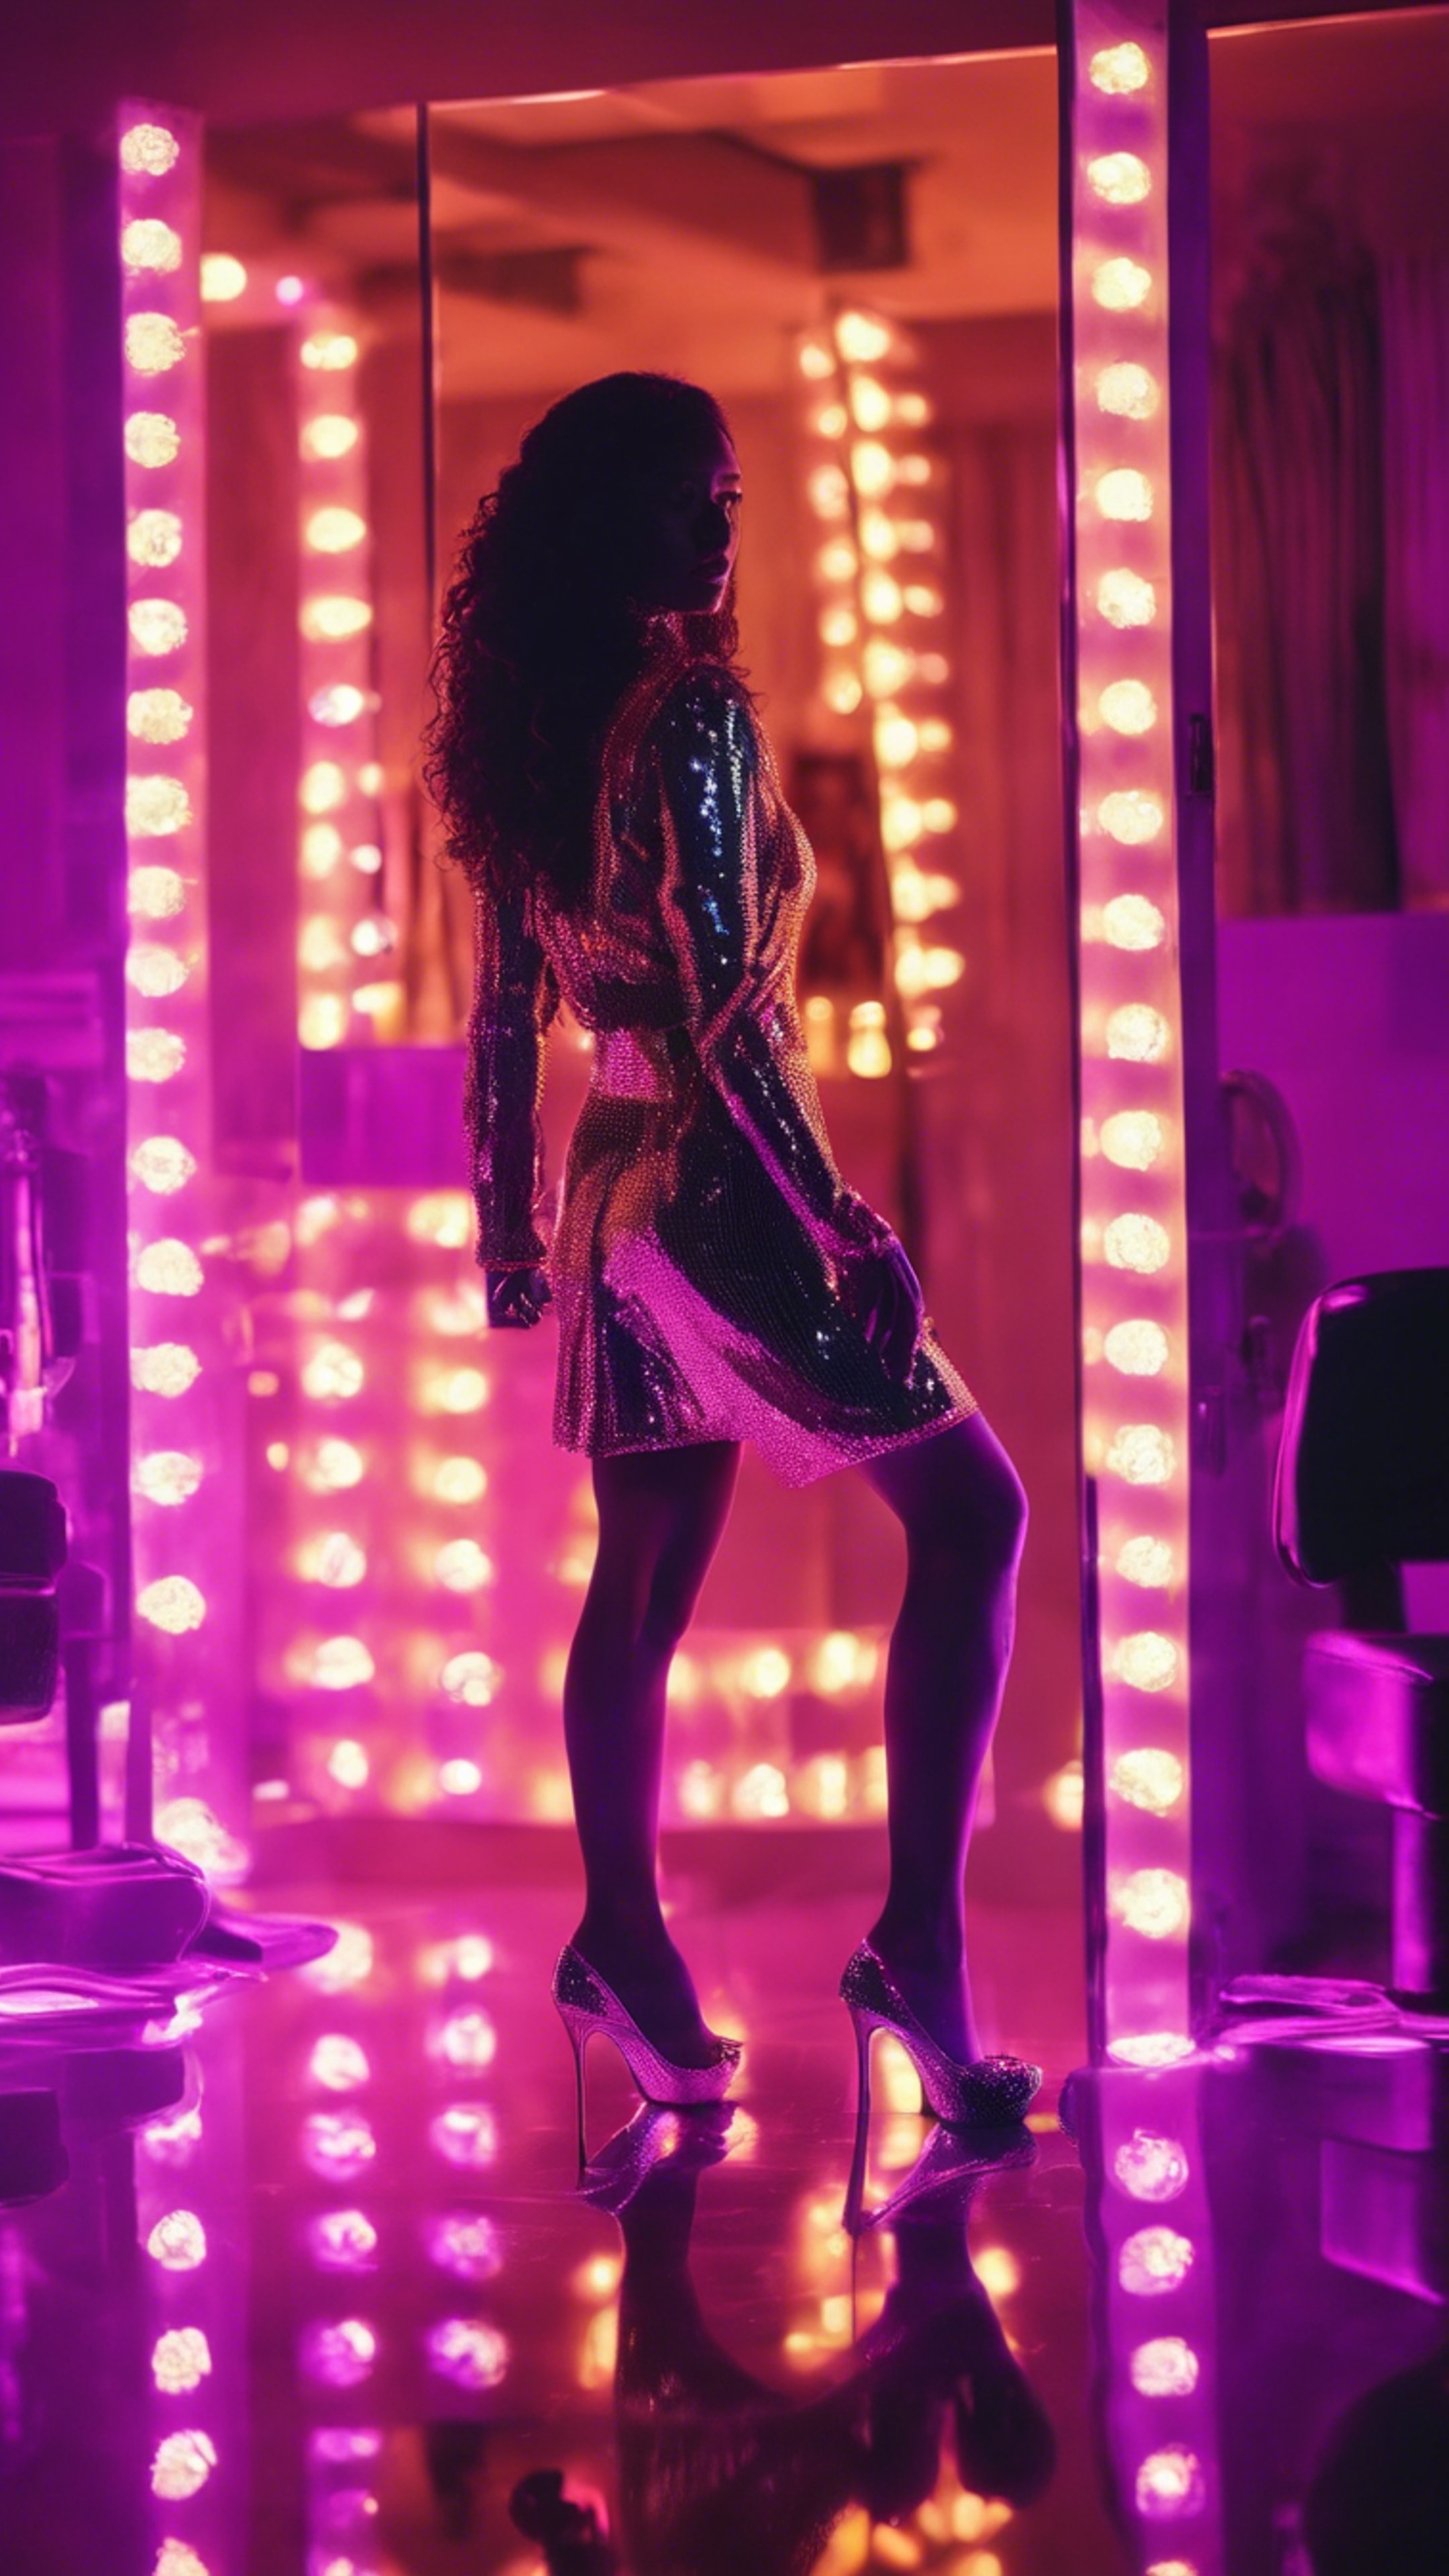 A confident baddie in a neon-lit room, dressed in sequins and high heels, her silhouette reflecting in the mirror. Wallpaper[dd190a8a8fd944b882f7]